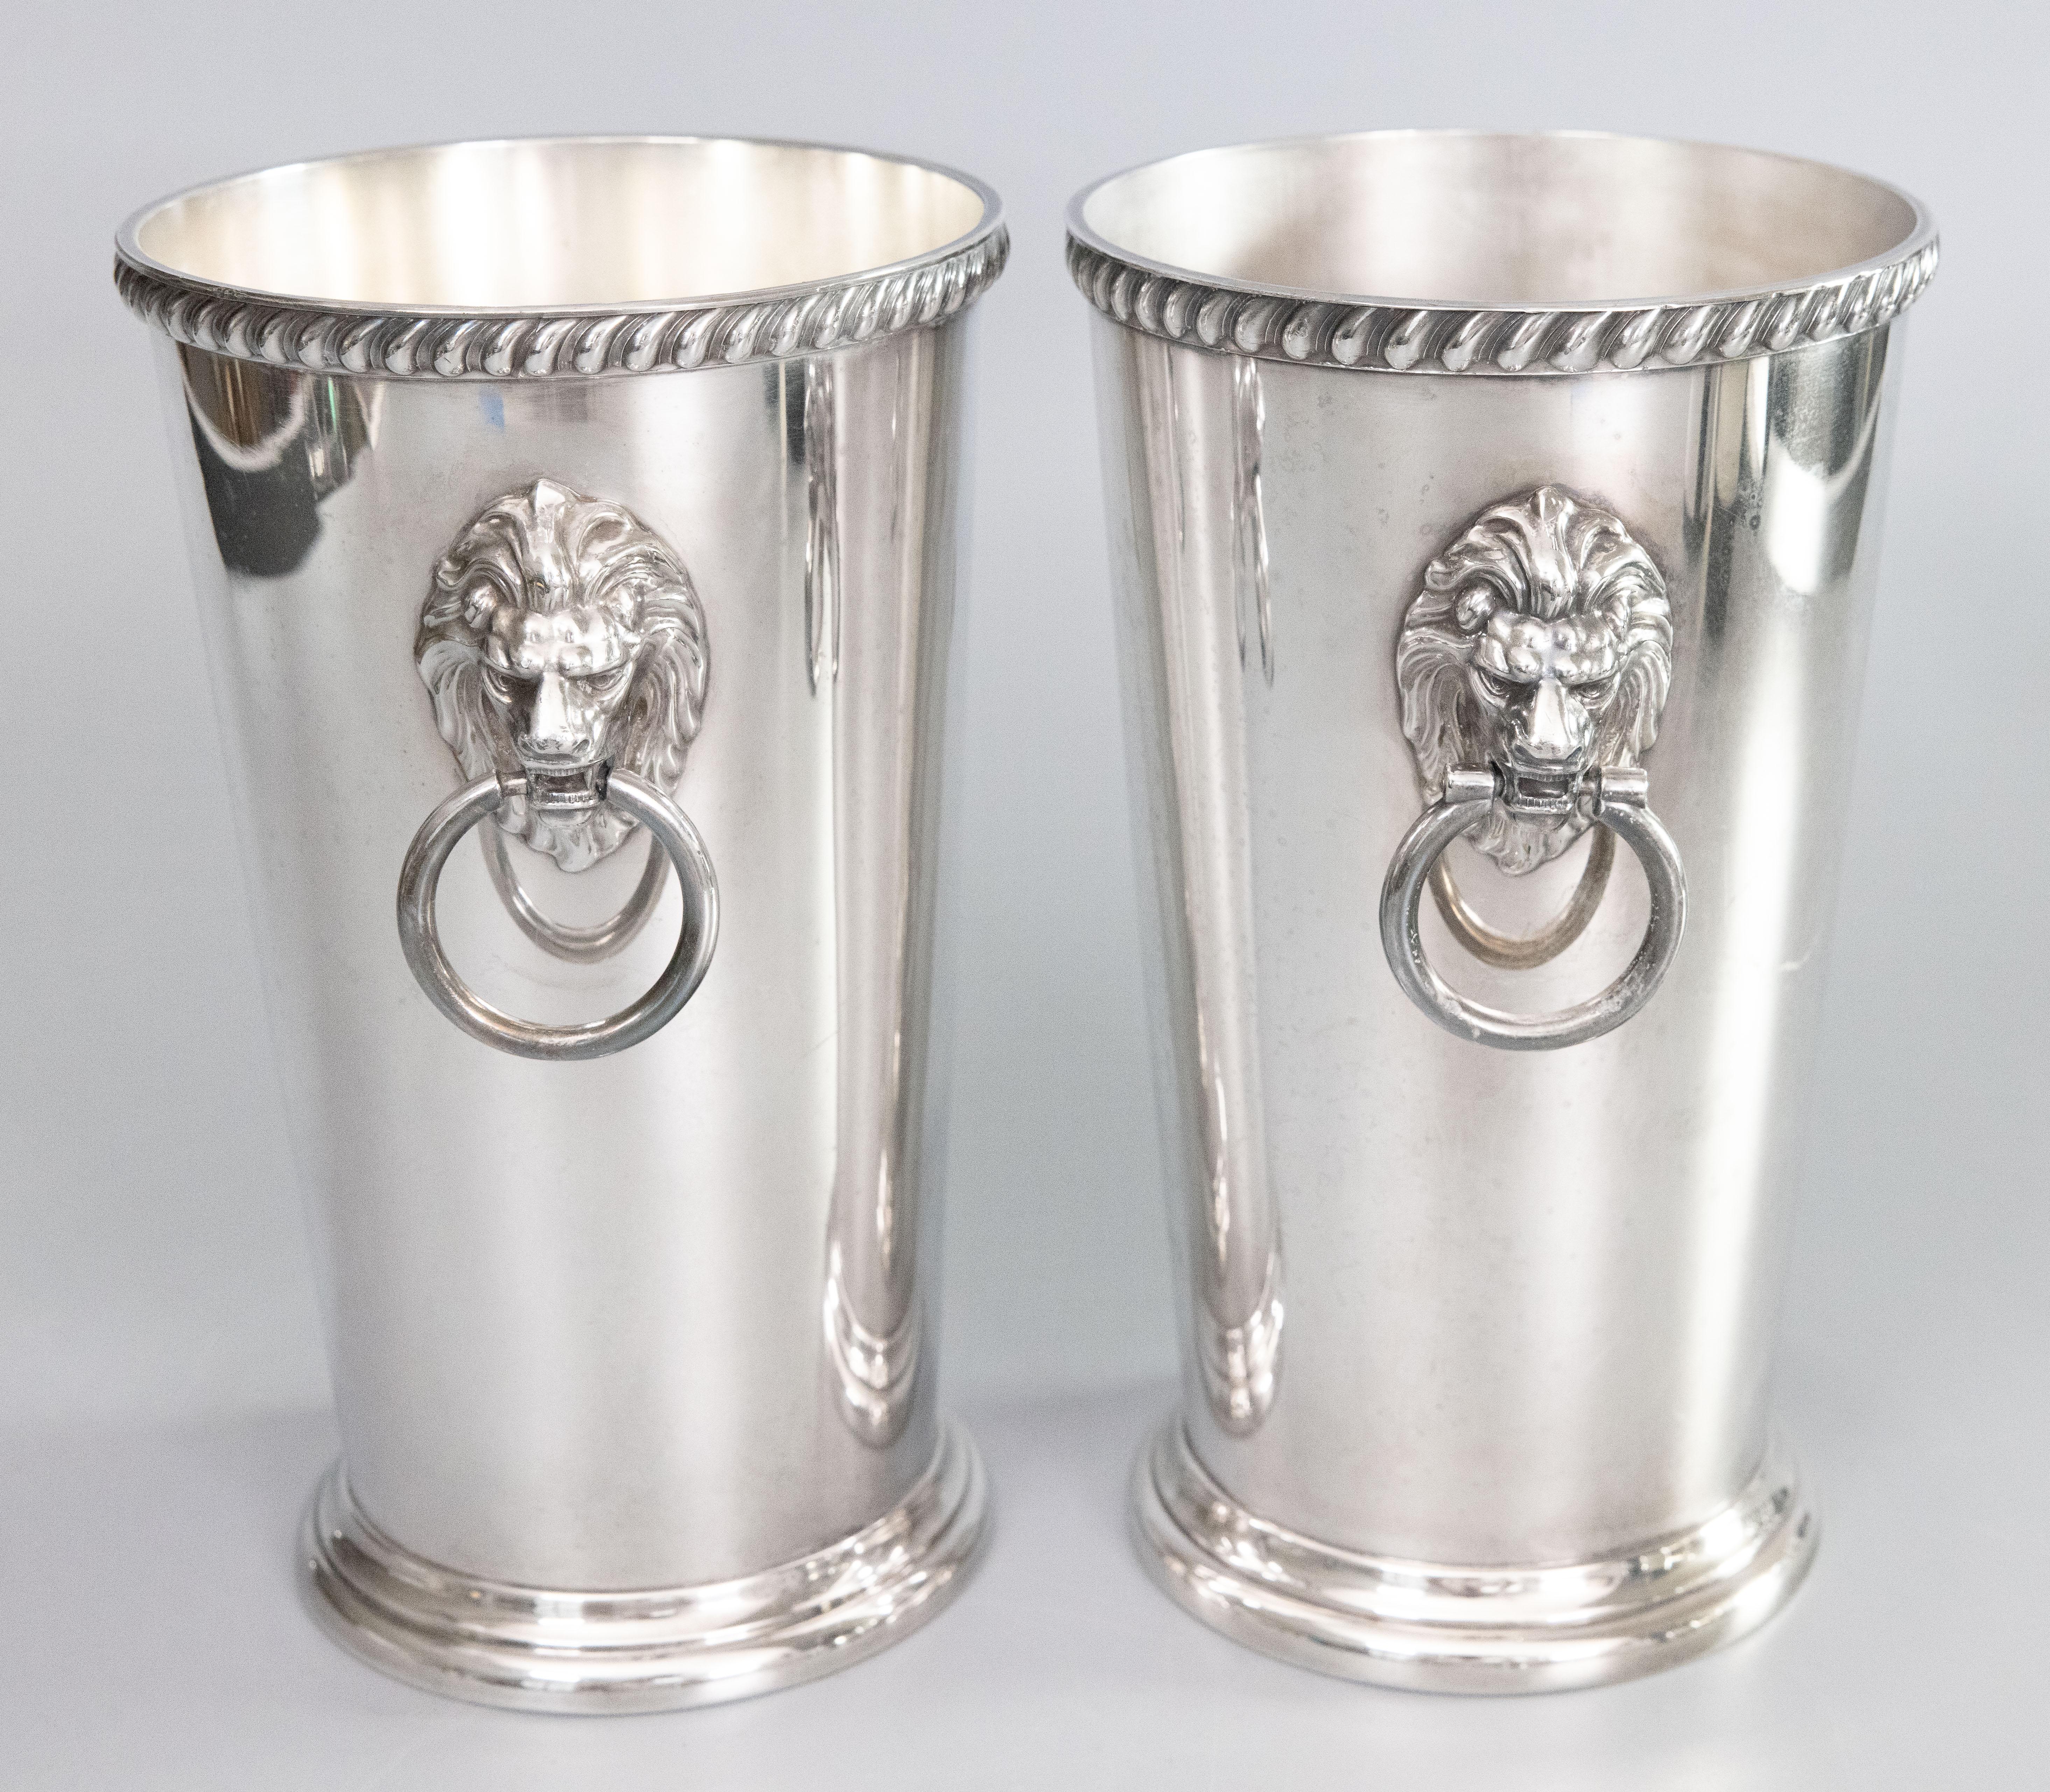 A lovely tall pair of mid-century silverplated champagne buckets or wine coolers with lion head ring handles. Maker's marks on reverse. These fine quality ice buckets are a nice large size, solid and heavy, with exquisite details in the lion heads